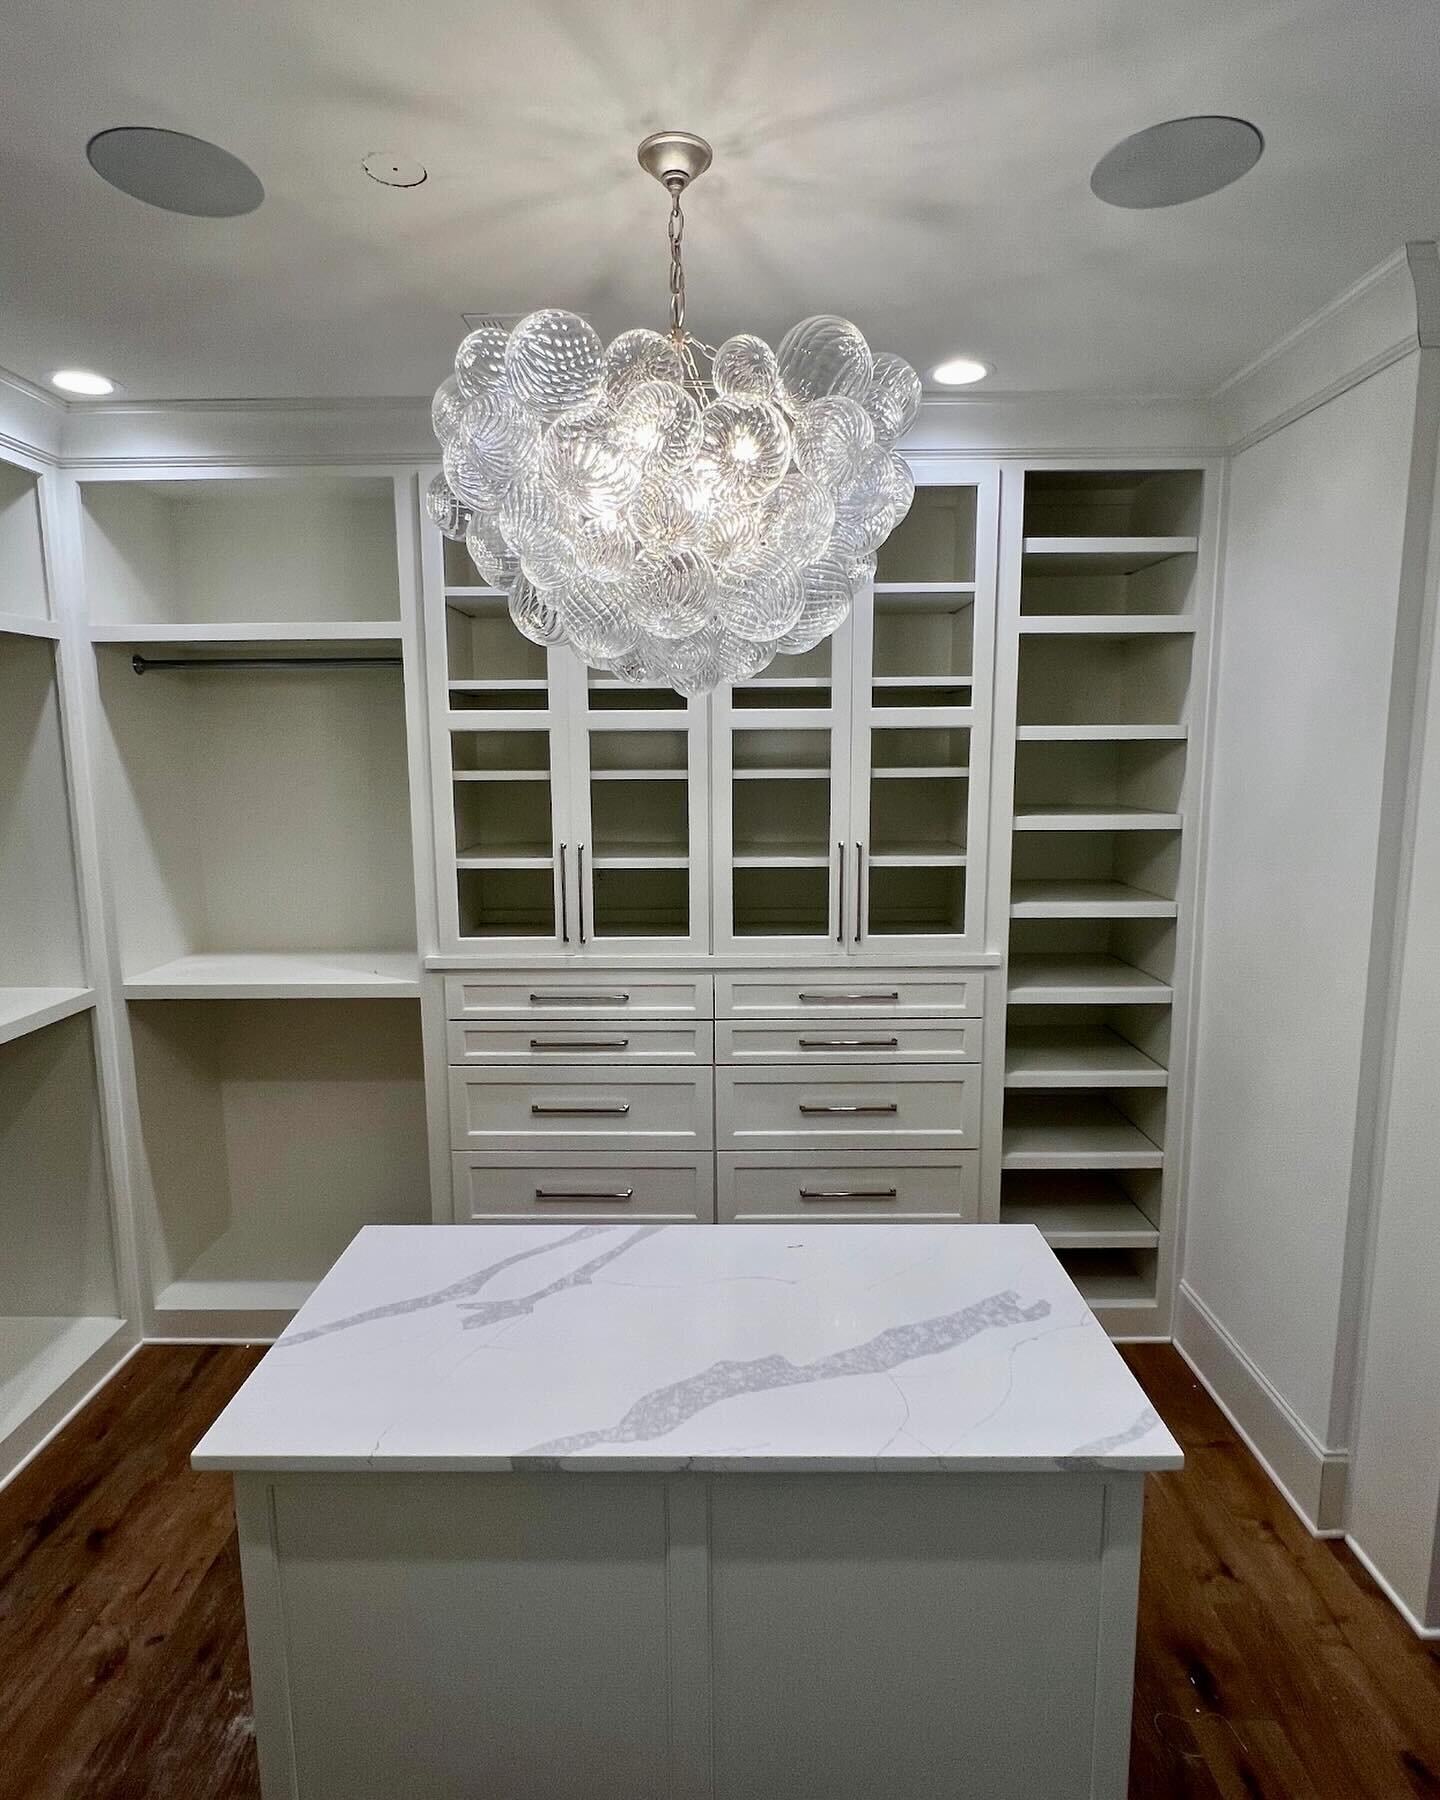 Now this is a closet! Custom-built to the client&rsquo;s needs exactly✔️ I Love This Stuff! 

#ilovethisstuff #customhomes #homes #homebuilder #construction #builders #interiordesign #realestate #newhome #dreamhome #architecture #renovation #luxuryho